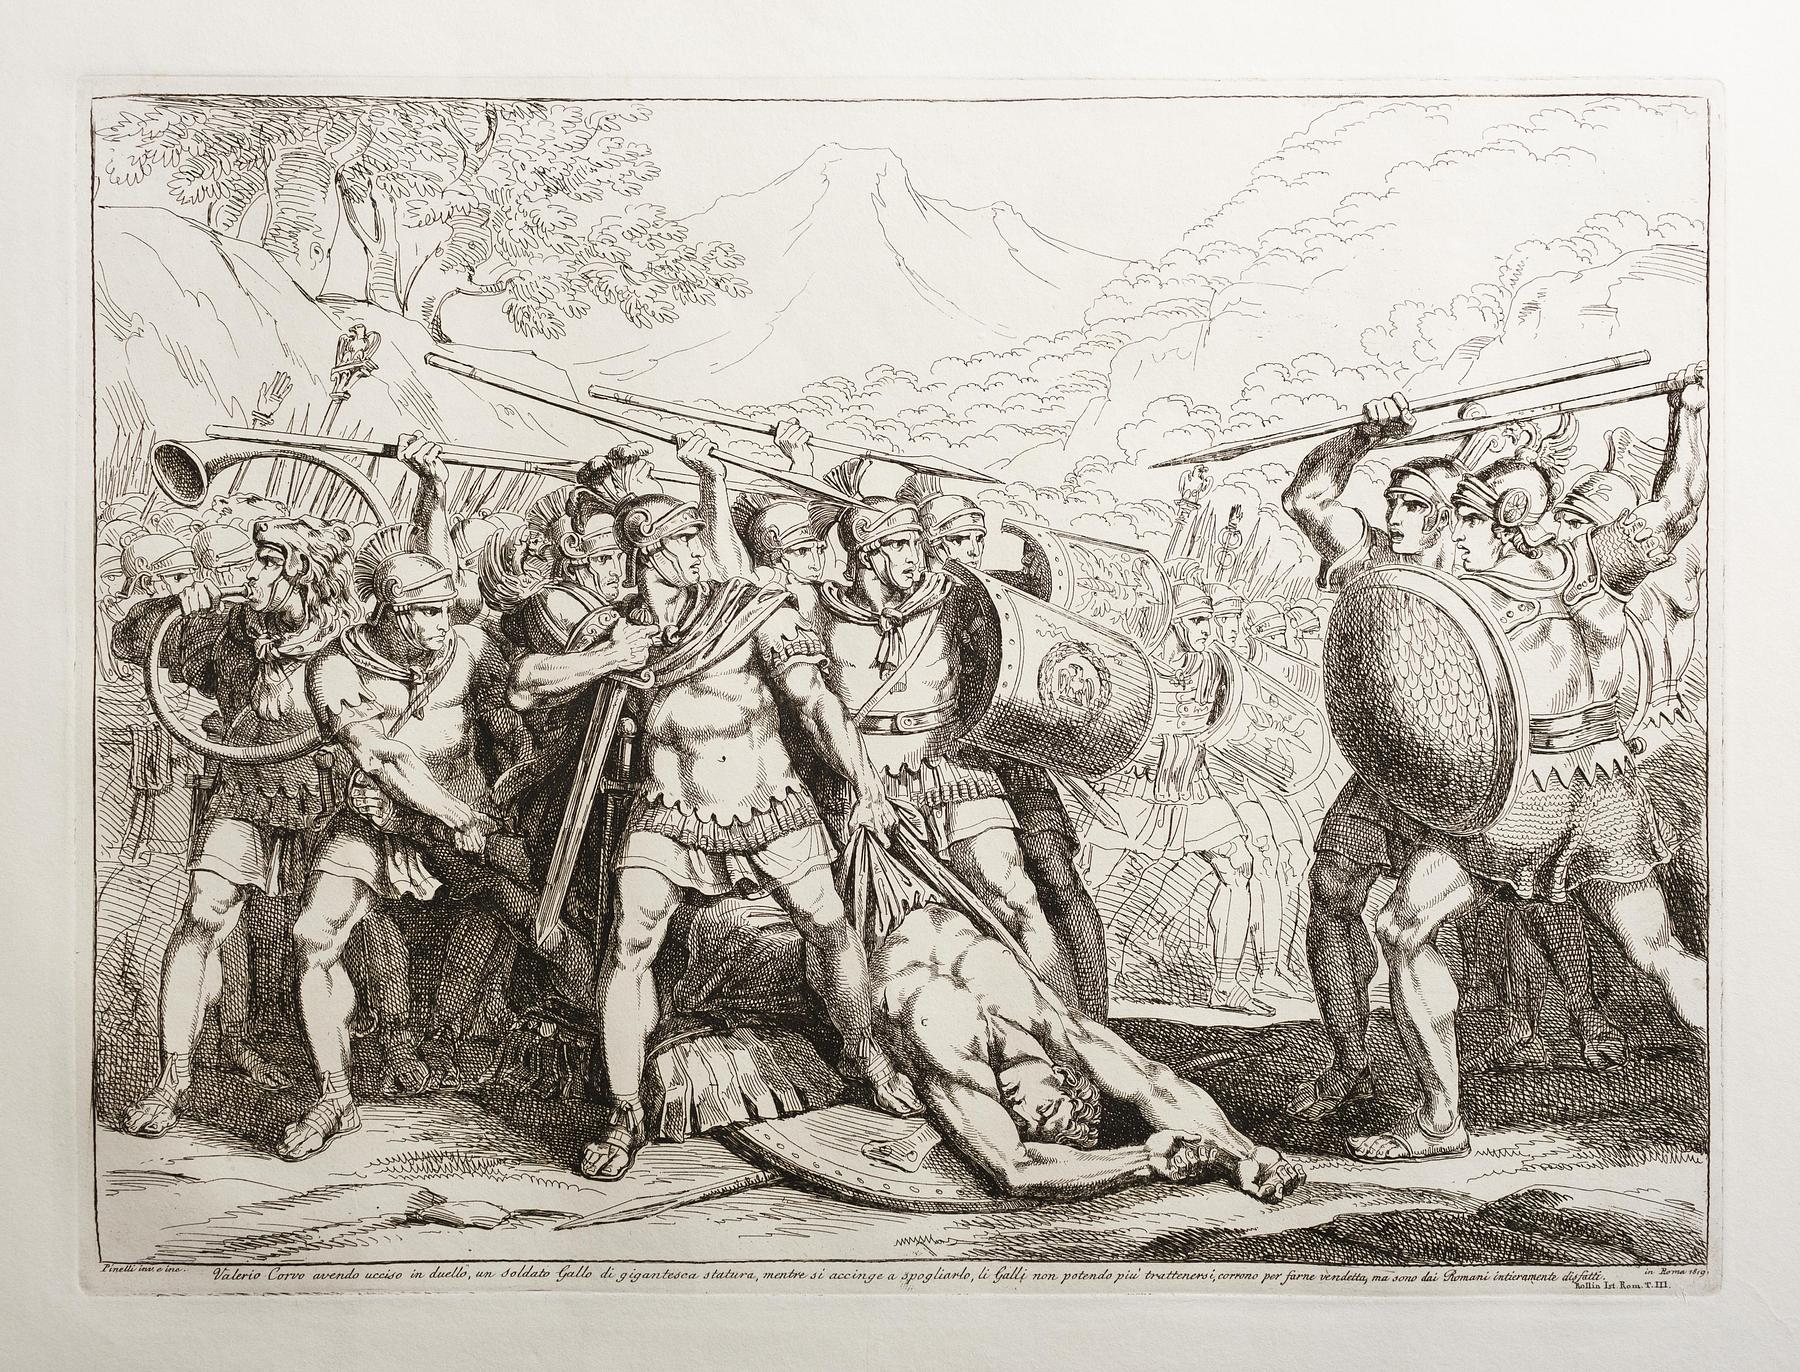 Valerio Corvo having killed a Gallo soldier of gigantic stature in a duel, while he is about to undress him, the Gauls, unable to restrain themselves, run to revenge him, but they are completely defeated by the Romans, E943,43